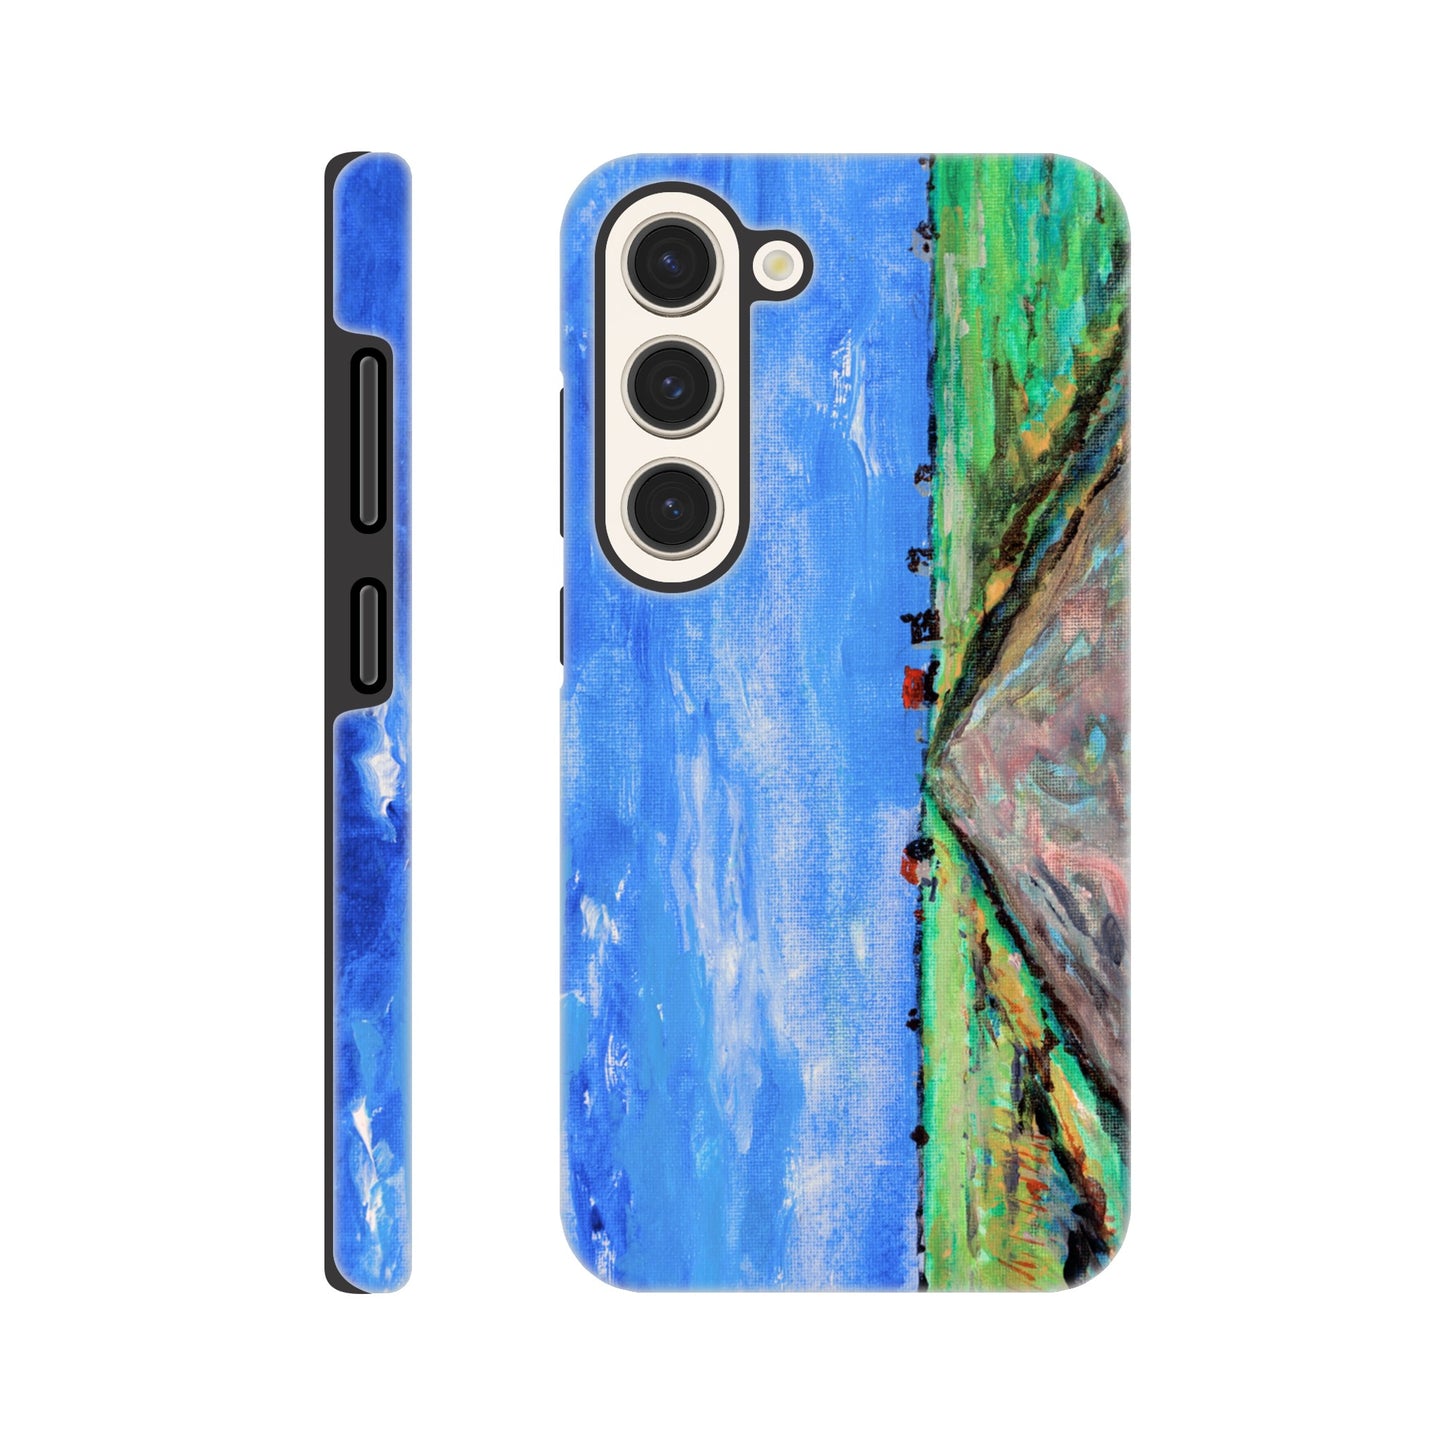 Down the Road - Phone cases